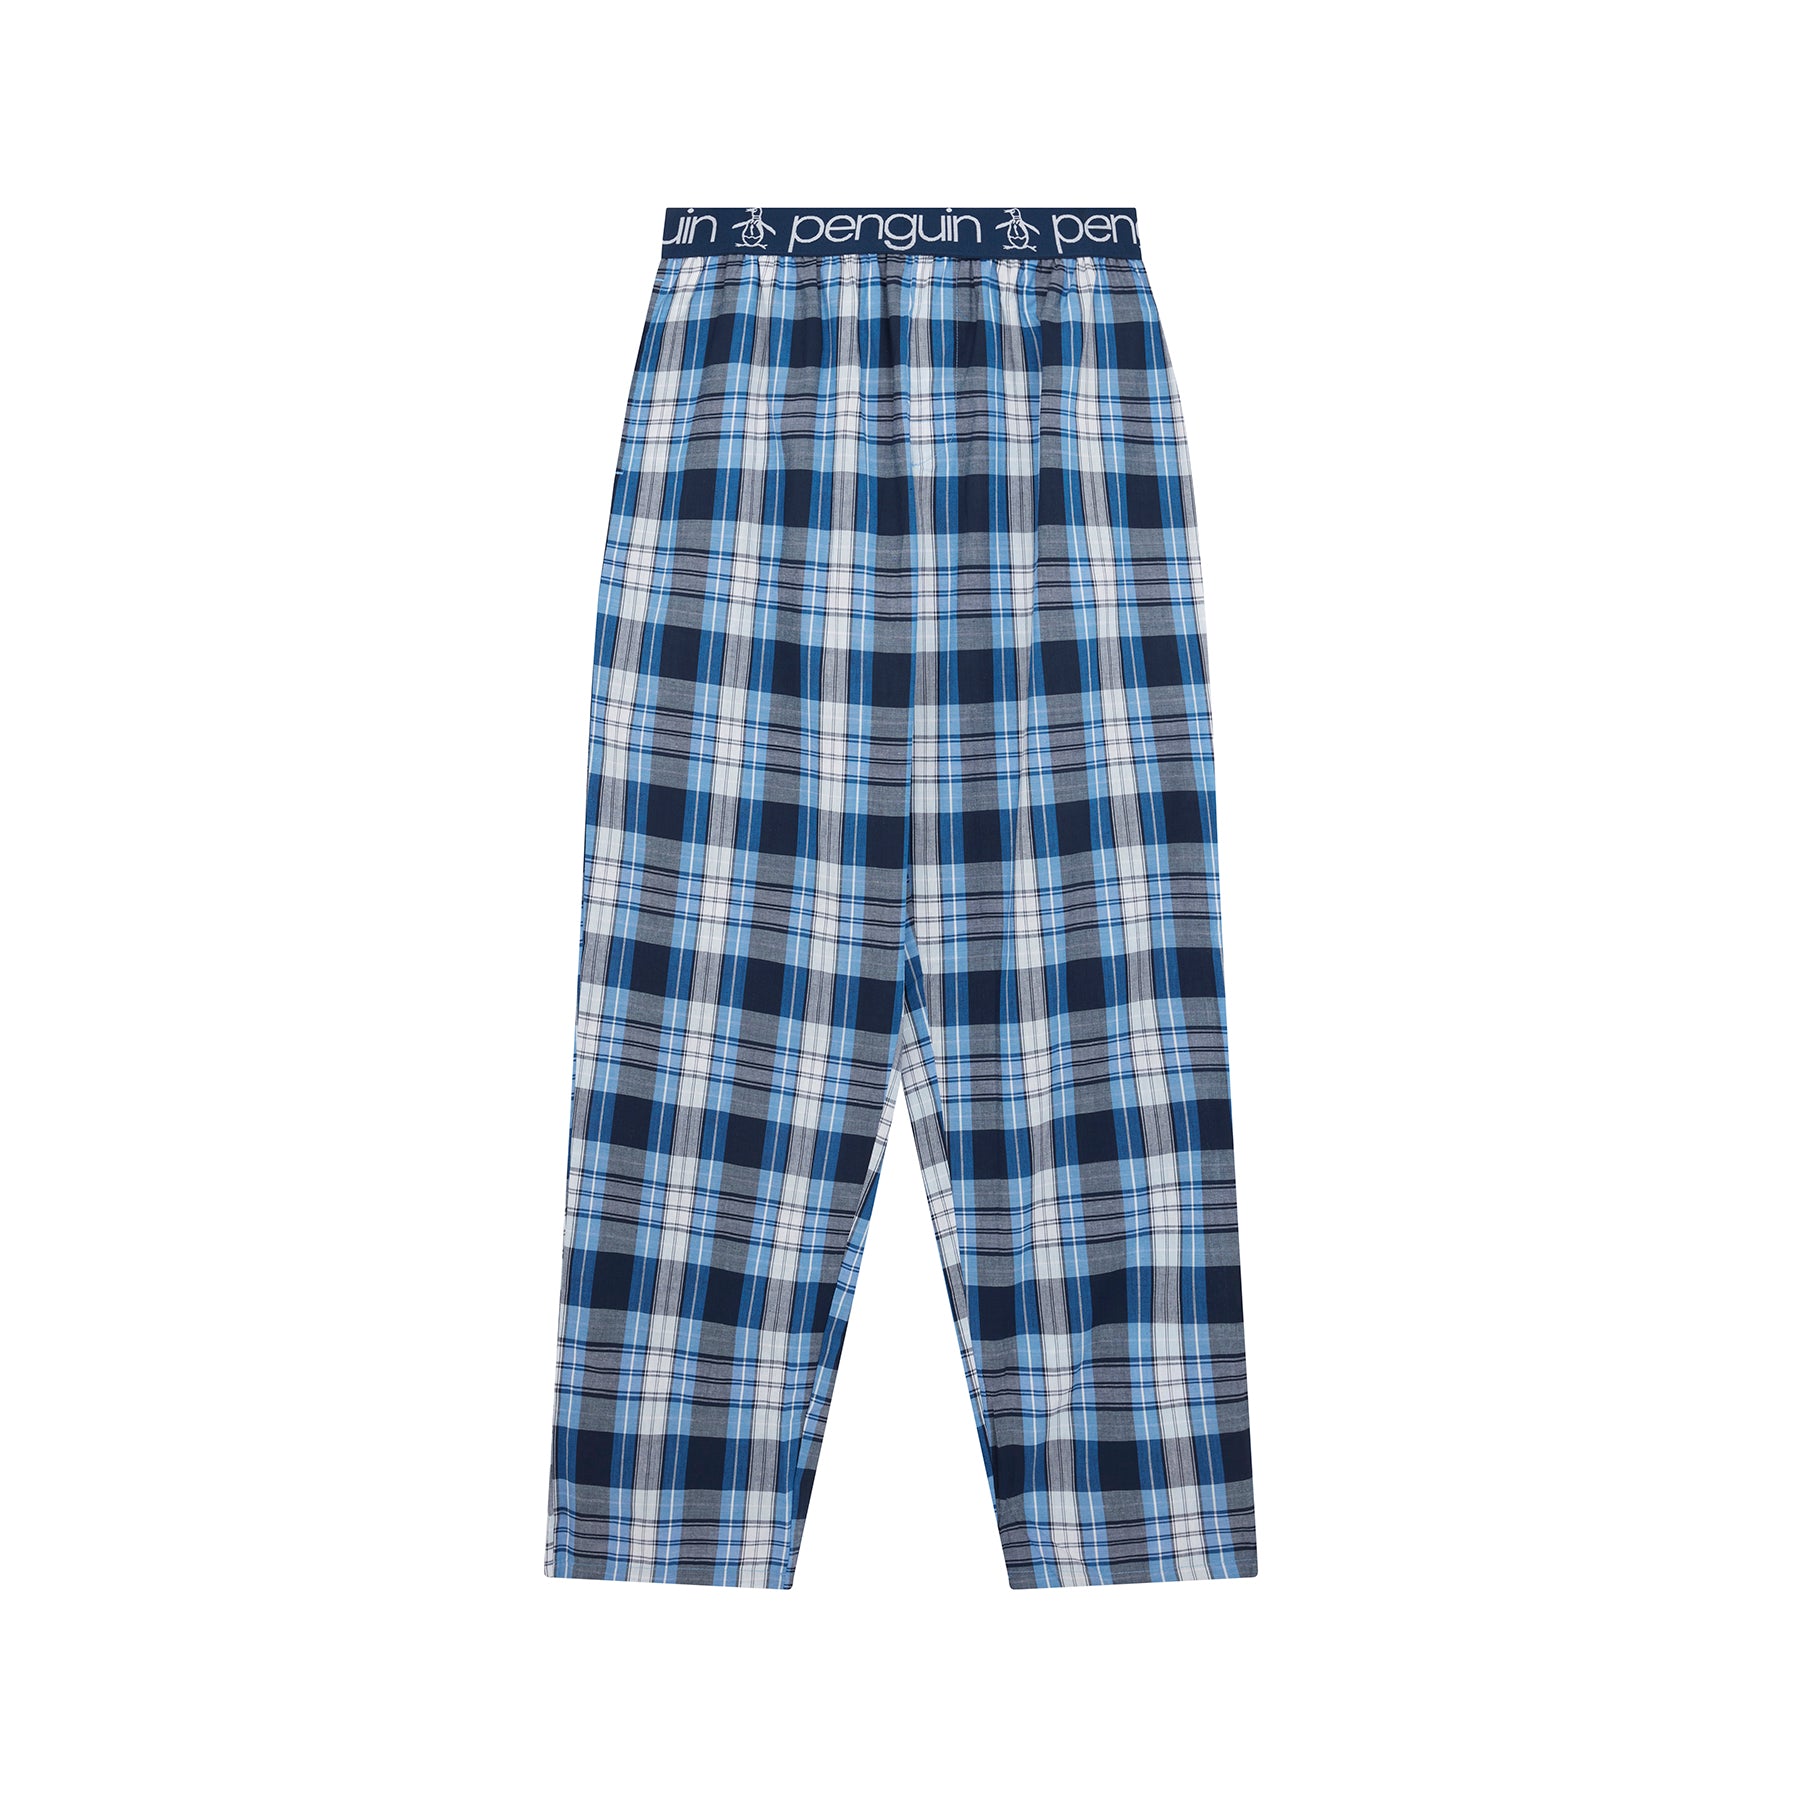 View 1 Pack Penguin Lounge Trousers In Blue information